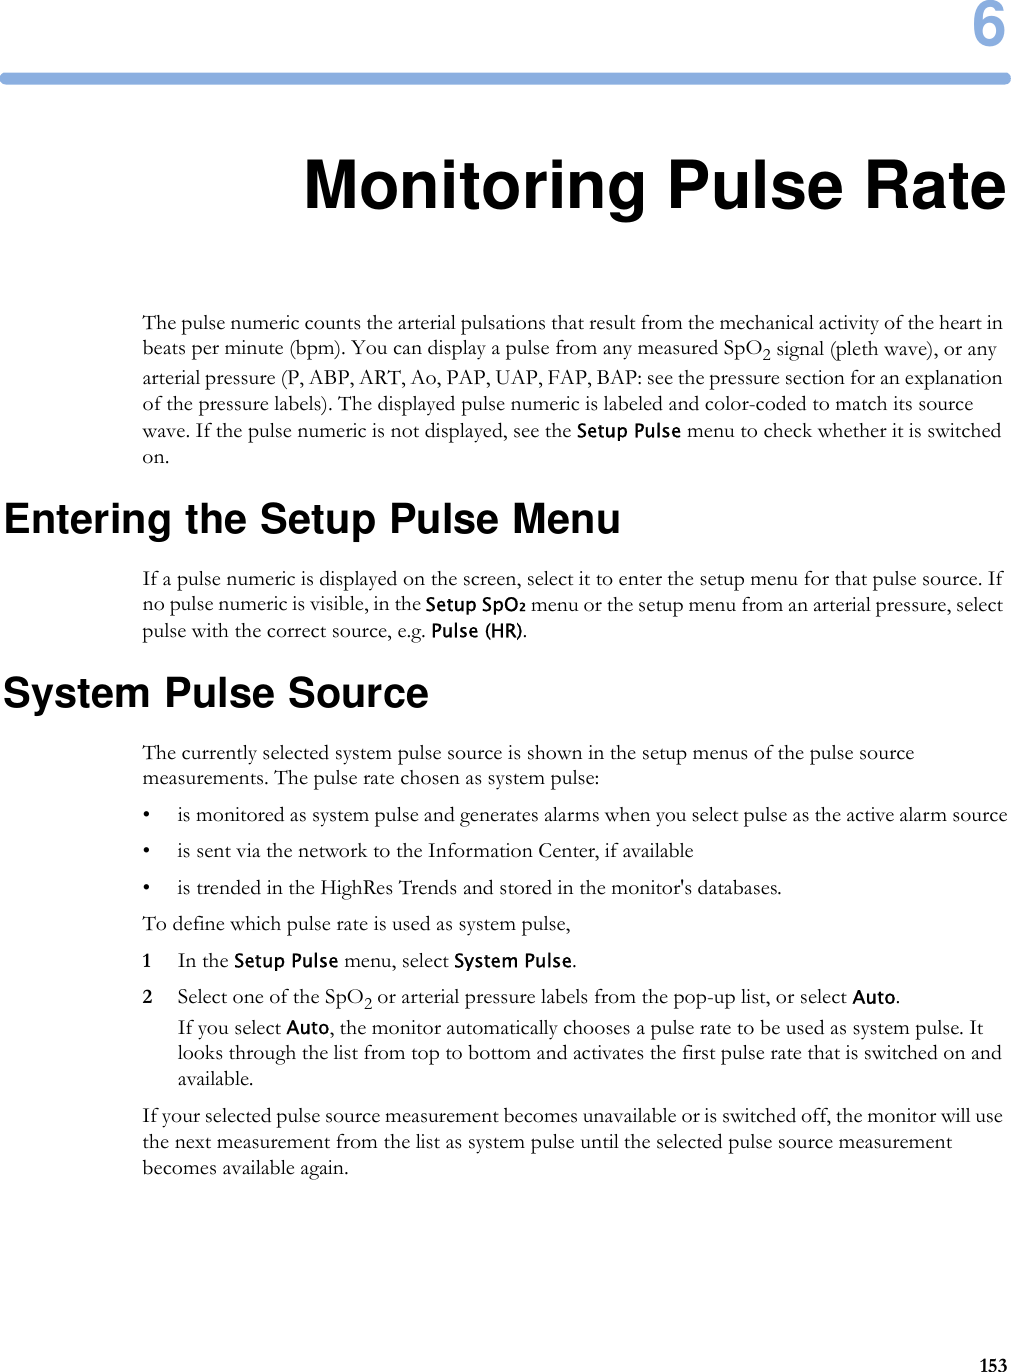 61536Monitoring Pulse RateThe pulse numeric counts the arterial pulsations that result from the mechanical activity of the heart in beats per minute (bpm). You can display a pulse from any measured SpO2 signal (pleth wave), or any arterial pressure (P, ABP, ART, Ao, PAP, UAP, FAP, BAP: see the pressure section for an explanation of the pressure labels). The displayed pulse numeric is labeled and color-coded to match its source wave. If the pulse numeric is not displayed, see the Setup Pulse menu to check whether it is switched on.Entering the Setup Pulse MenuIf a pulse numeric is displayed on the screen, select it to enter the setup menu for that pulse source. If no pulse numeric is visible, in the Setup SpO₂ menu or the setup menu from an arterial pressure, select pulse with the correct source, e.g. Pulse (HR).System Pulse SourceThe currently selected system pulse source is shown in the setup menus of the pulse source measurements. The pulse rate chosen as system pulse:• is monitored as system pulse and generates alarms when you select pulse as the active alarm source• is sent via the network to the Information Center, if available• is trended in the HighRes Trends and stored in the monitor&apos;s databases.To define which pulse rate is used as system pulse,1In the Setup Pulse menu, select System Pulse.2Select one of the SpO2 or arterial pressure labels from the pop-up list, or select Auto. If you select Auto, the monitor automatically chooses a pulse rate to be used as system pulse. It looks through the list from top to bottom and activates the first pulse rate that is switched on and available.If your selected pulse source measurement becomes unavailable or is switched off, the monitor will use the next measurement from the list as system pulse until the selected pulse source measurement becomes available again.